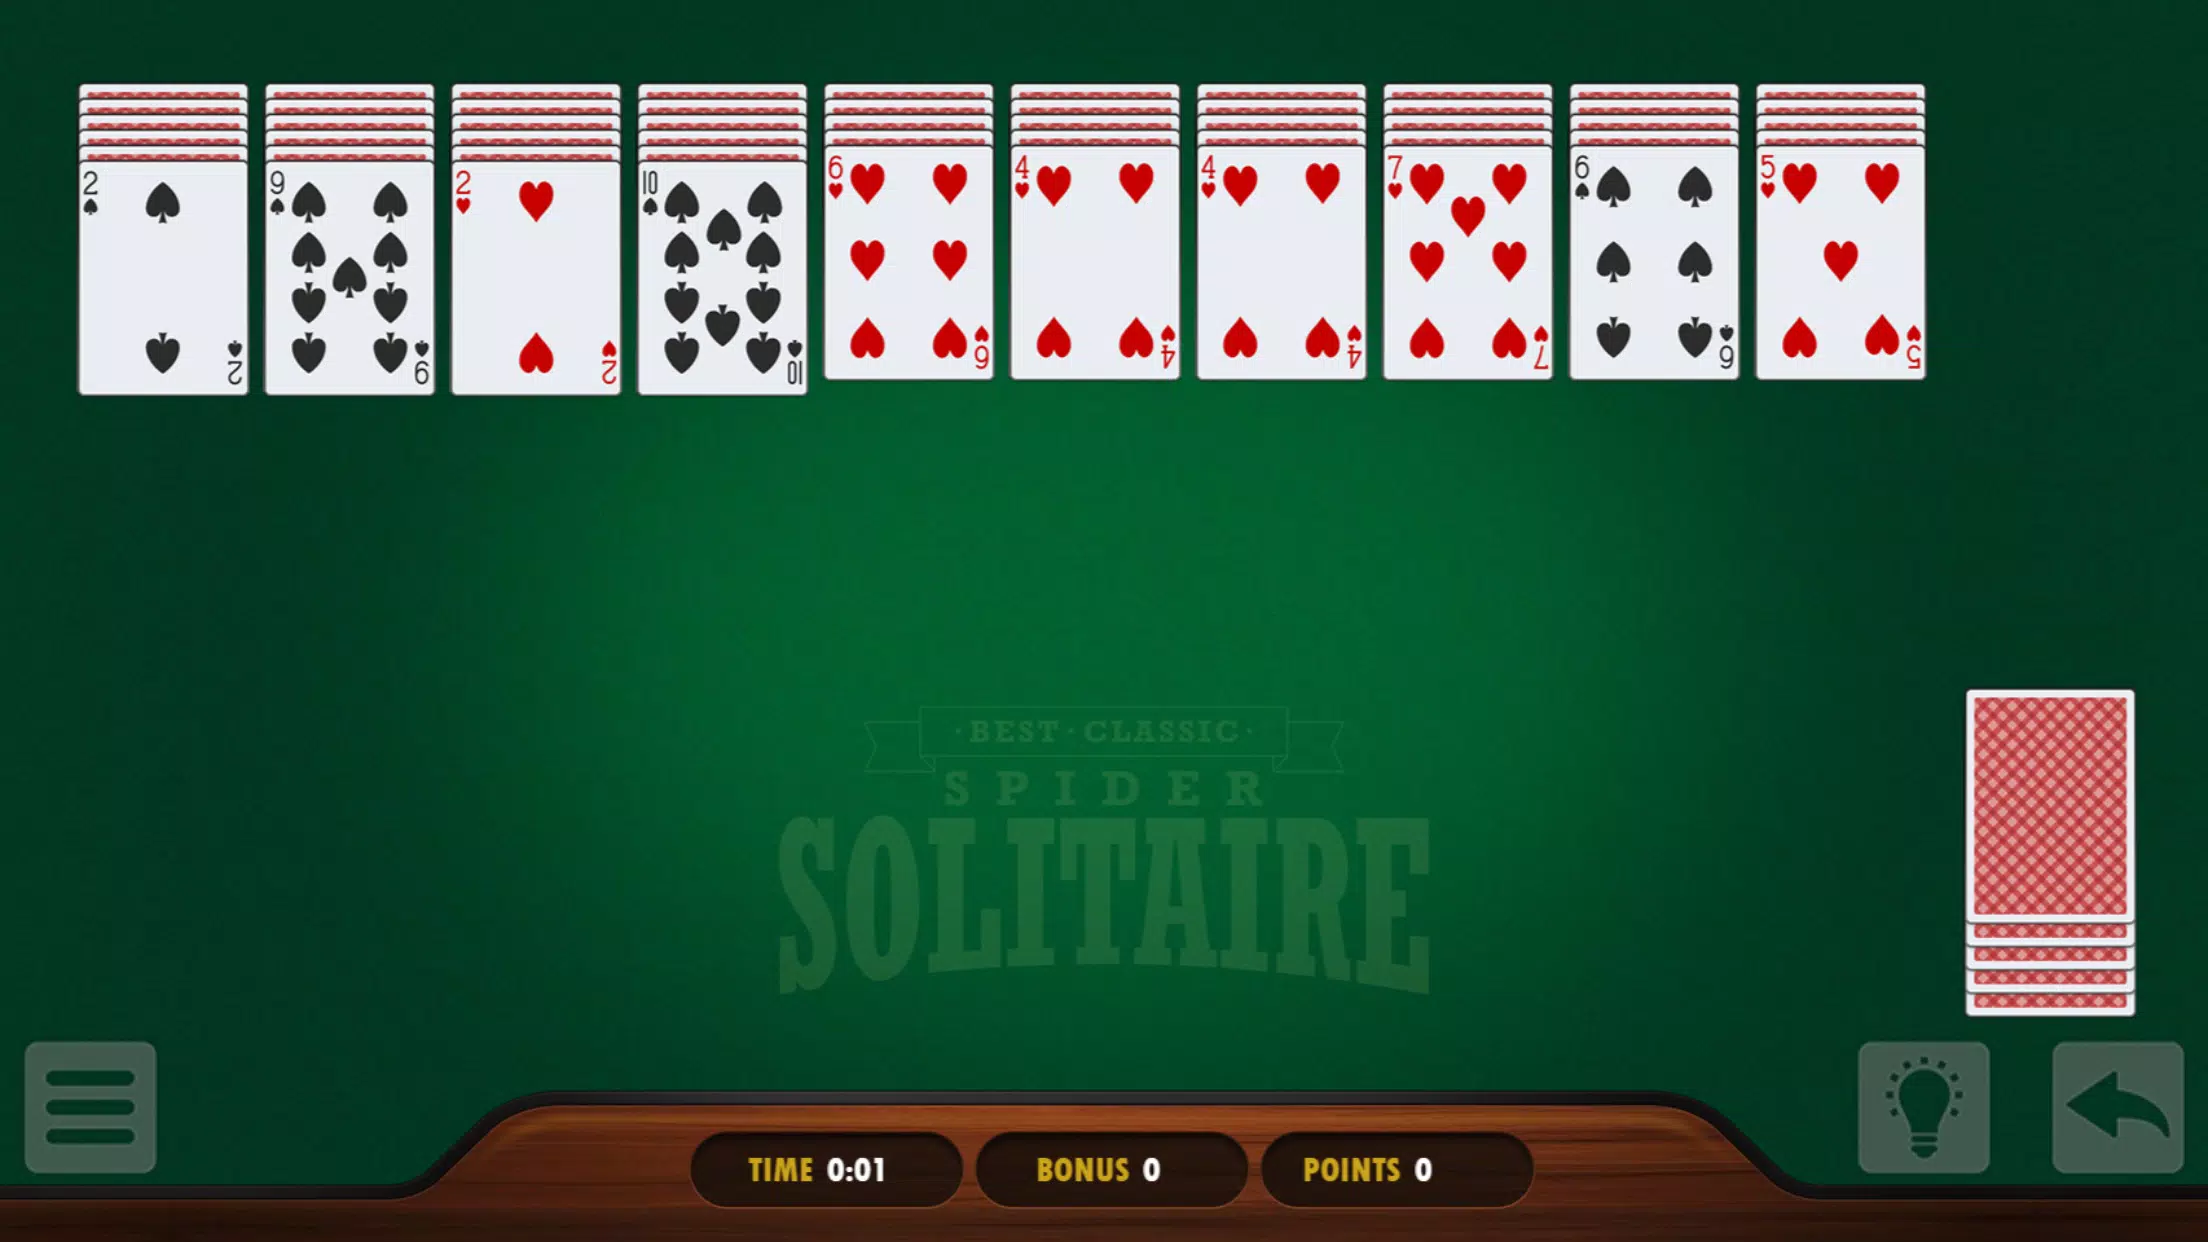 wireless Maintenance playground Spider Solitaire [BEST CLASSIC] APK per Android Download